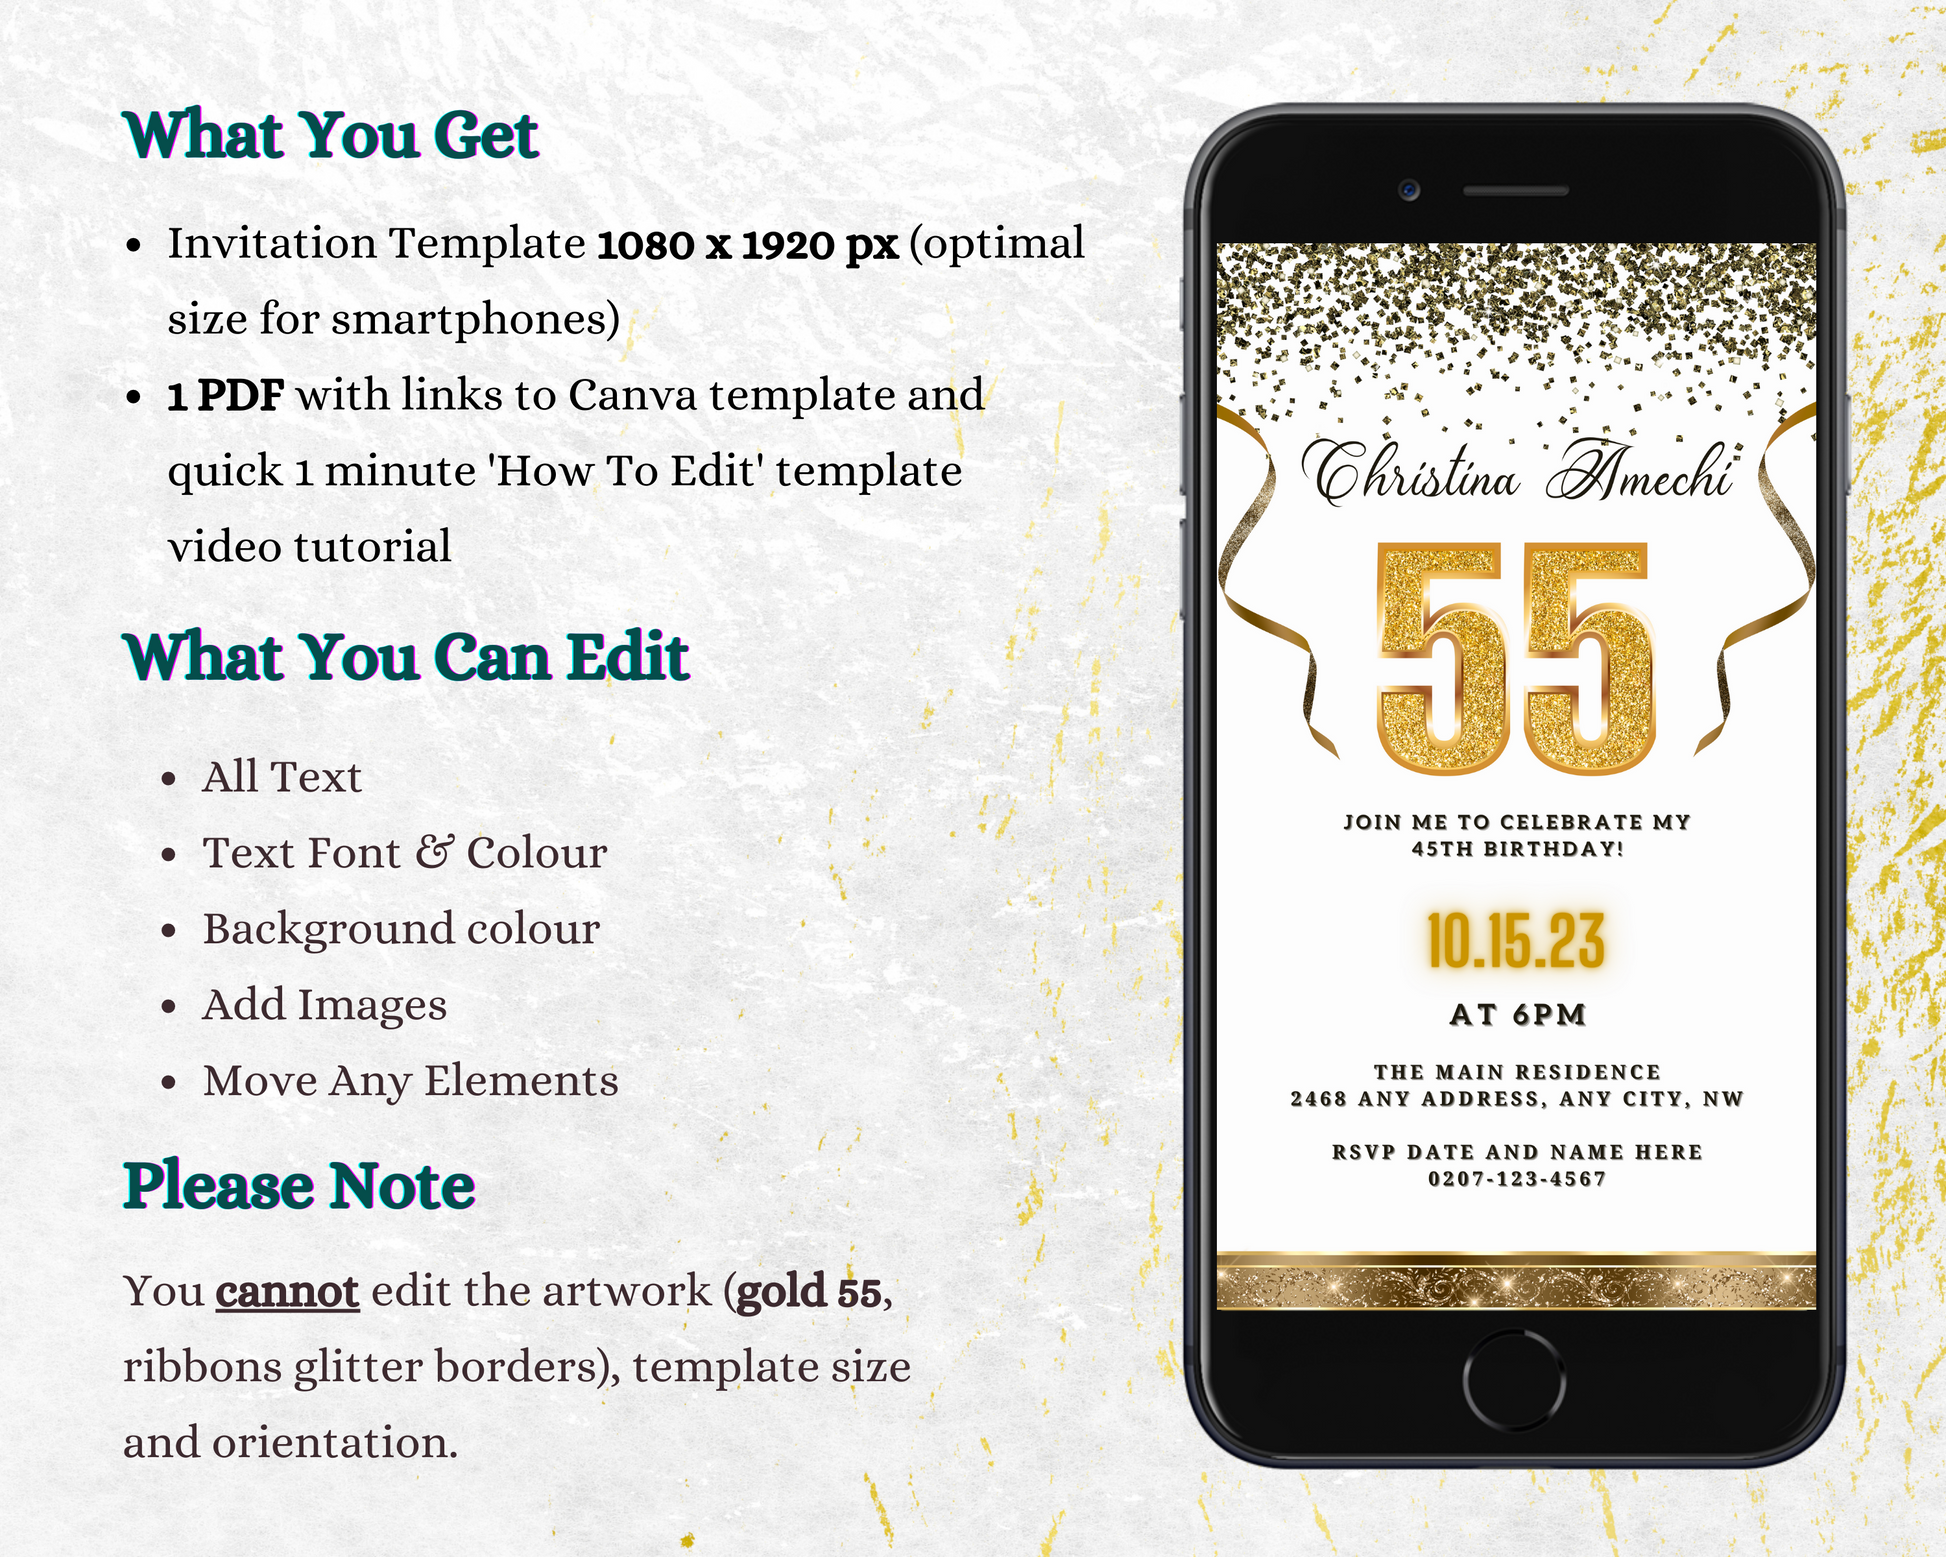 Customisable White Gold Confetti 55th Birthday Evite displayed on a smartphone. Features editable gold text and ribbons, ideal for sharing via digital platforms.